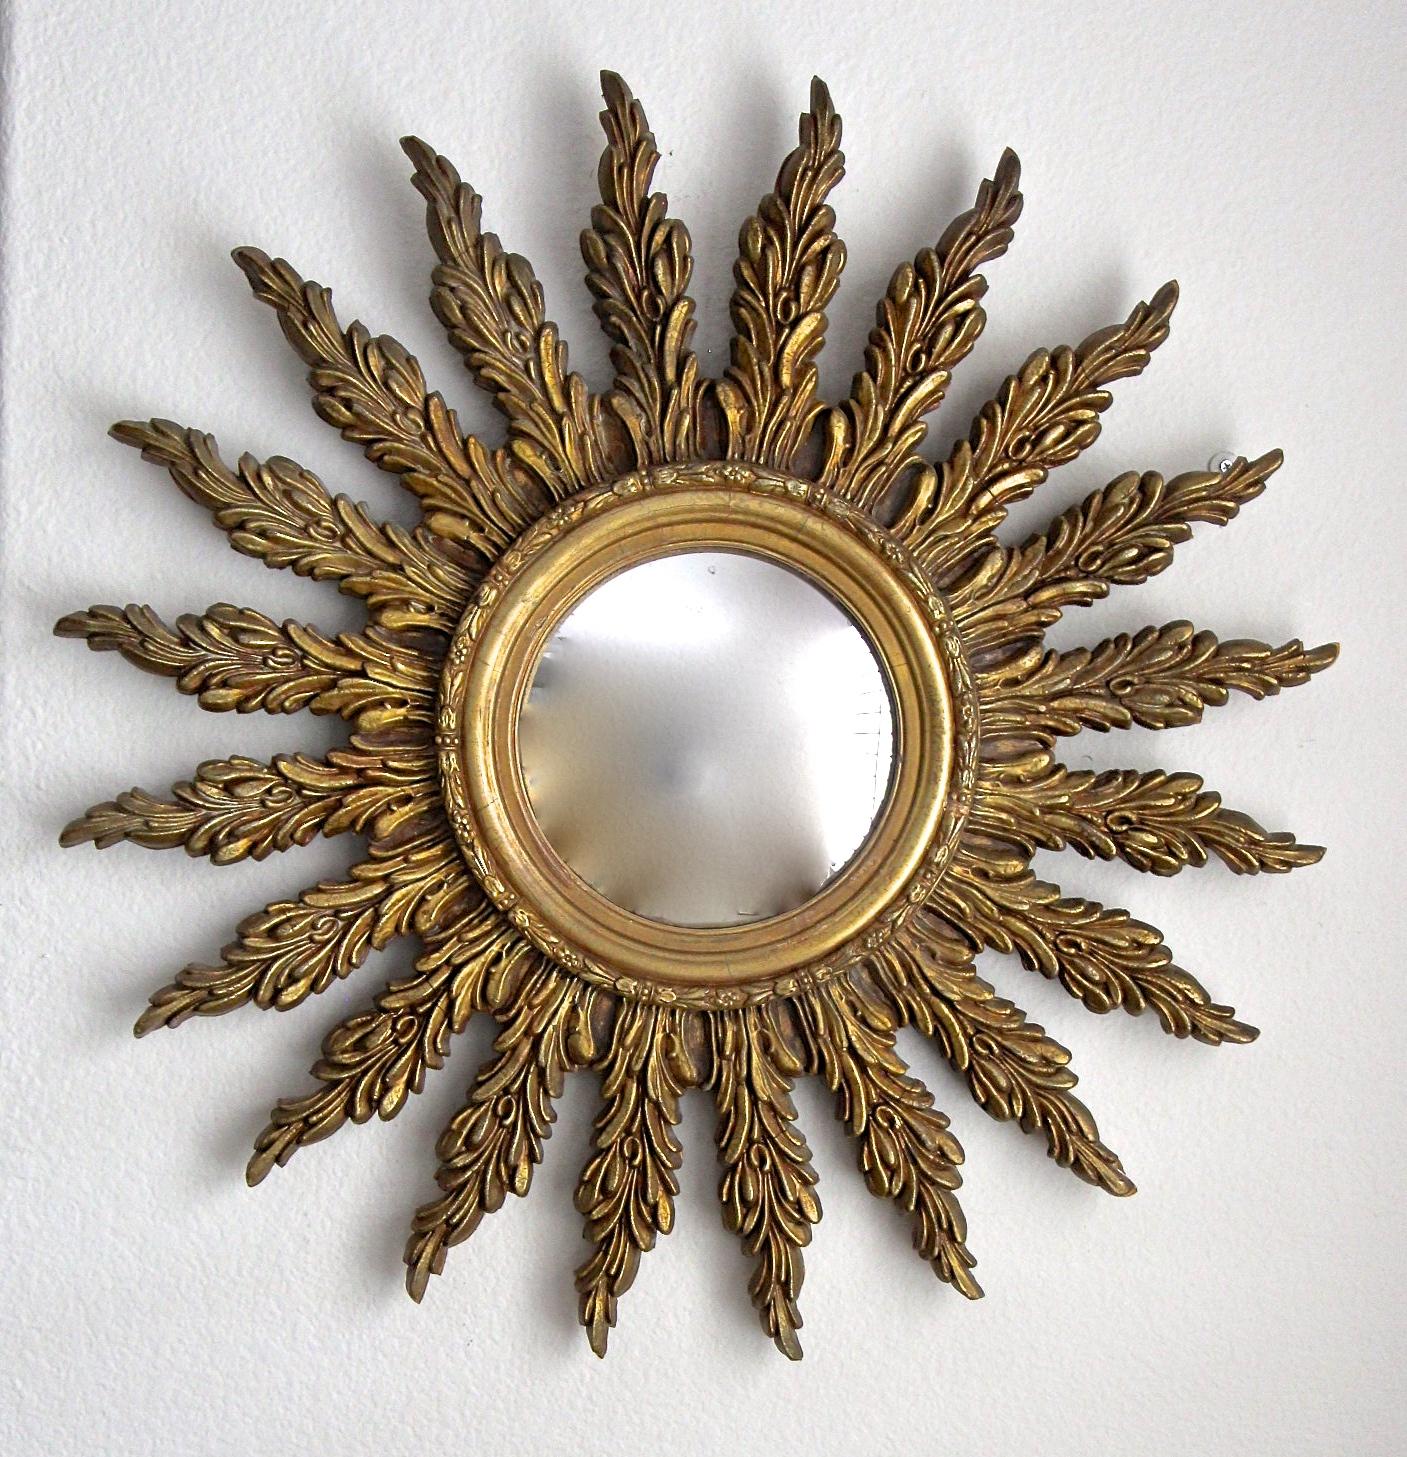 Mid-20th Century French Convex Sunburst Giltwood Wall Mirror For Sale